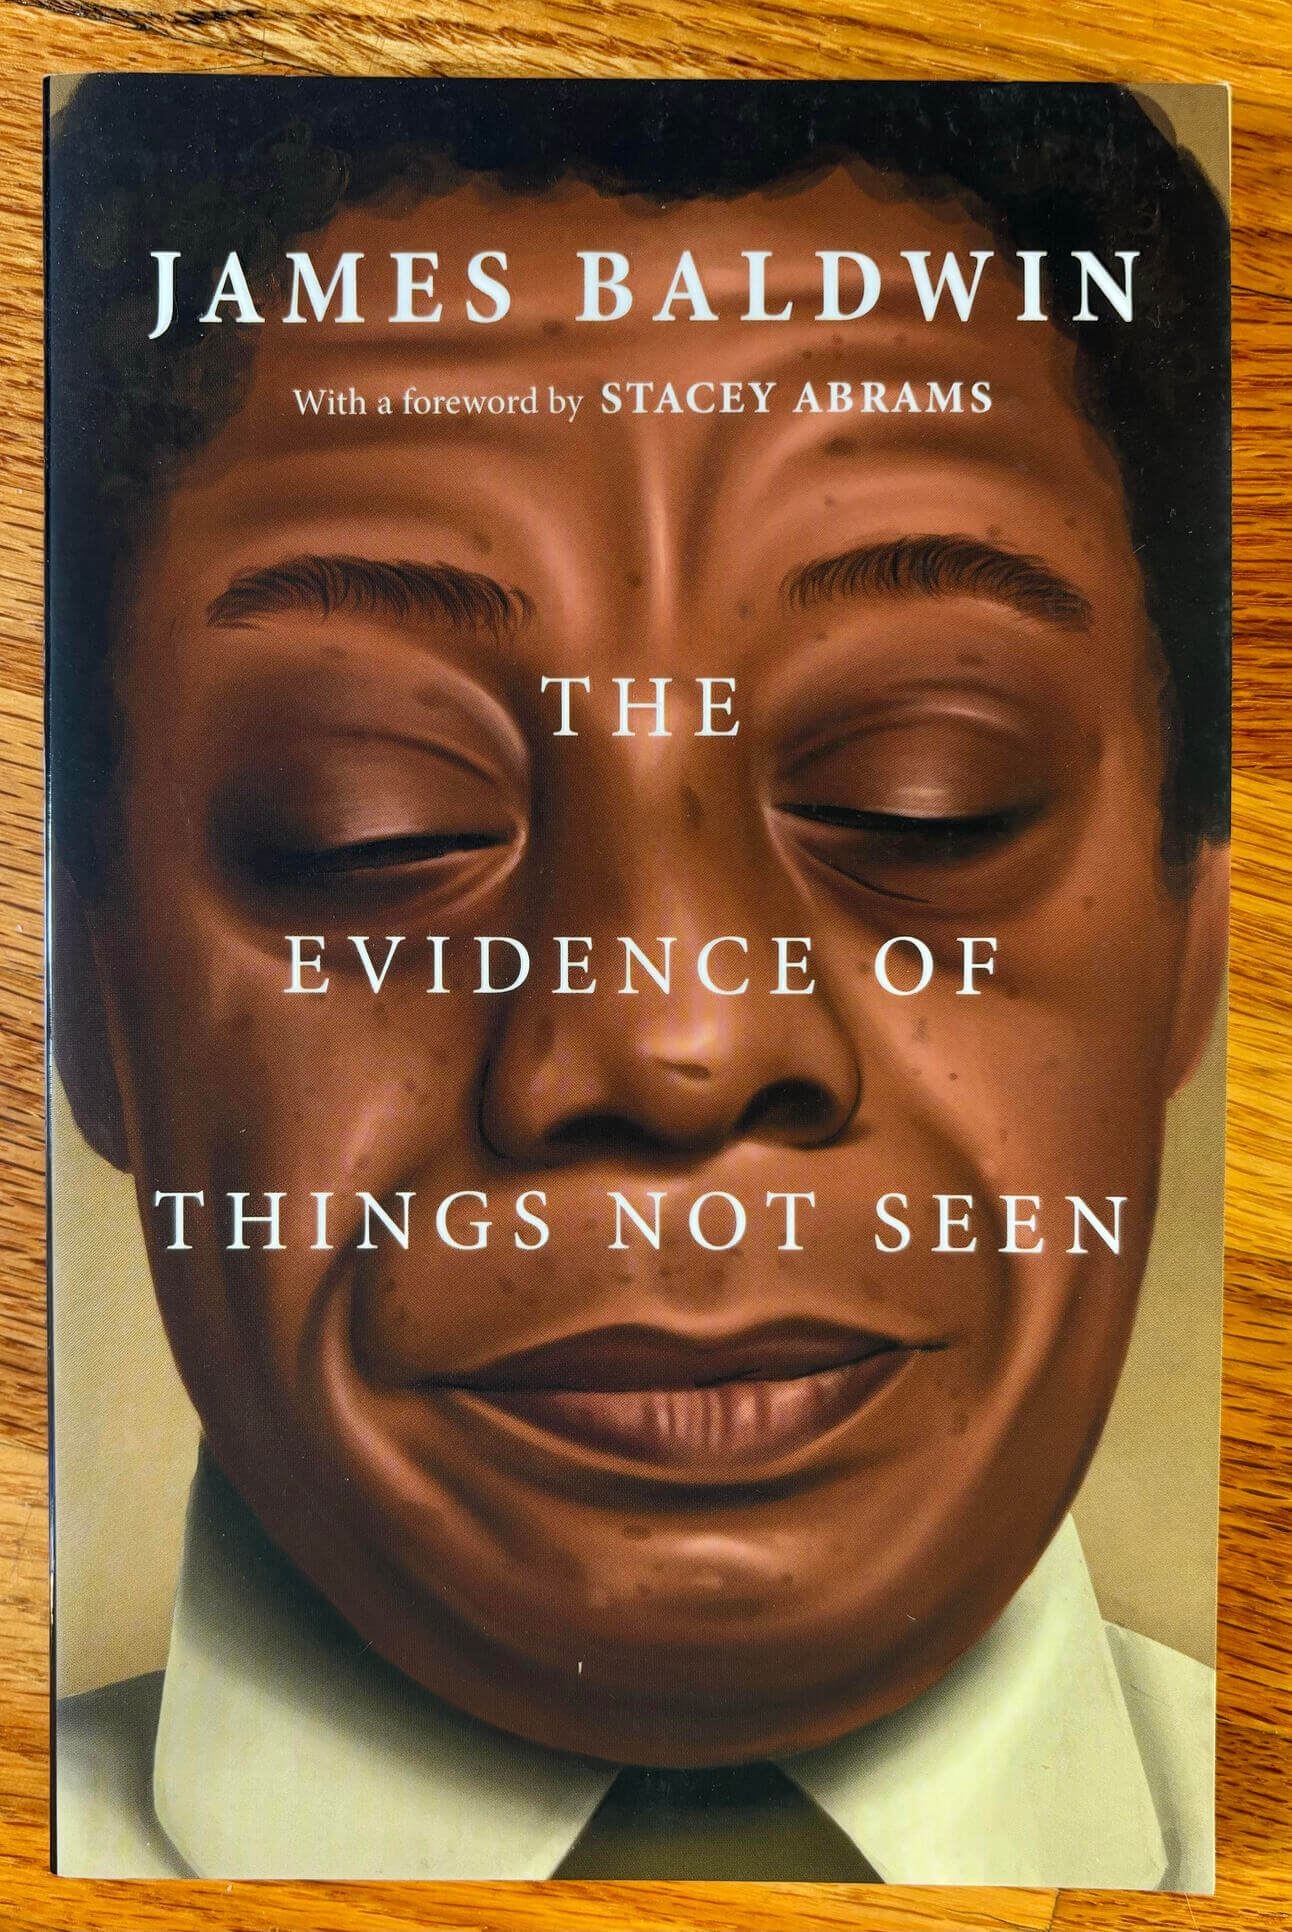 “The Evidence of Things Not Seen” by James Baldwin